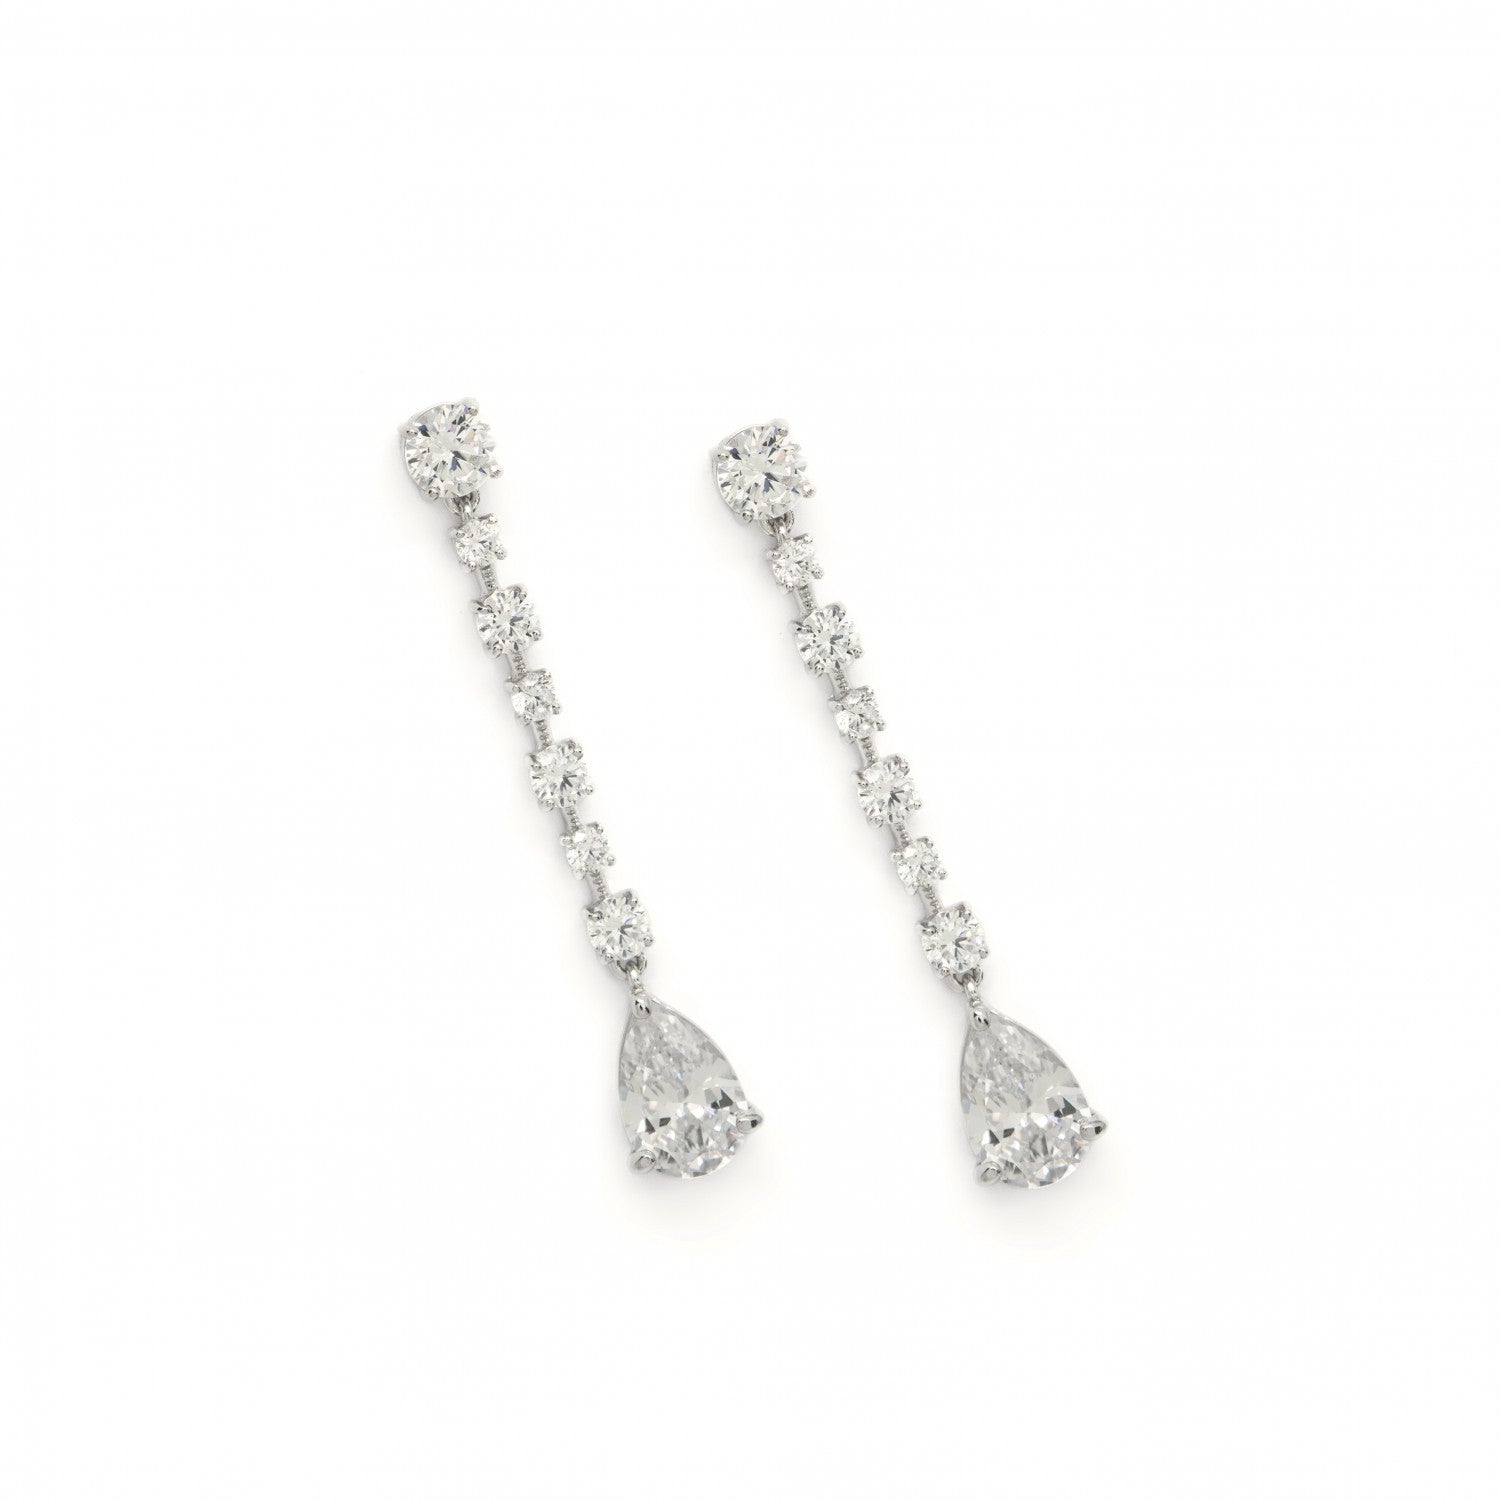 Long shiny earrings with zirconias and movement